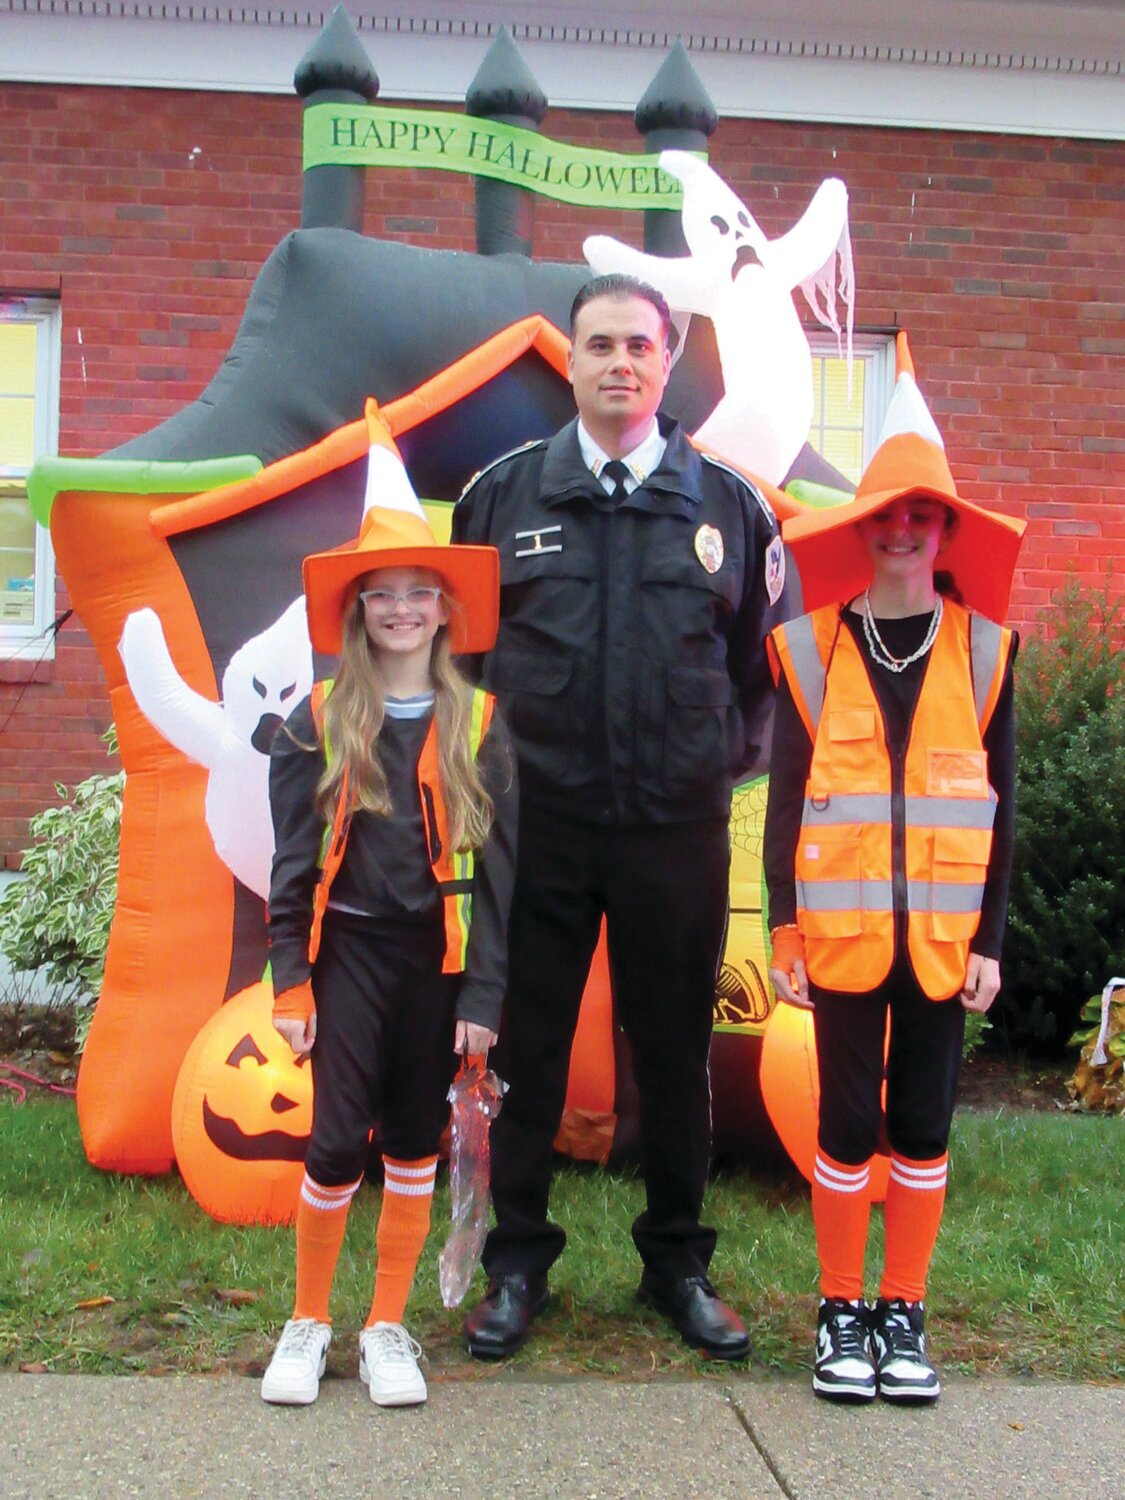 HAPPY HALLOWEEN: Johnston Police Chief Mark Vieira welcomed Victoria Anreozzi and Page Sousa, who wore special hats to Monday’s Trunk or Treat.